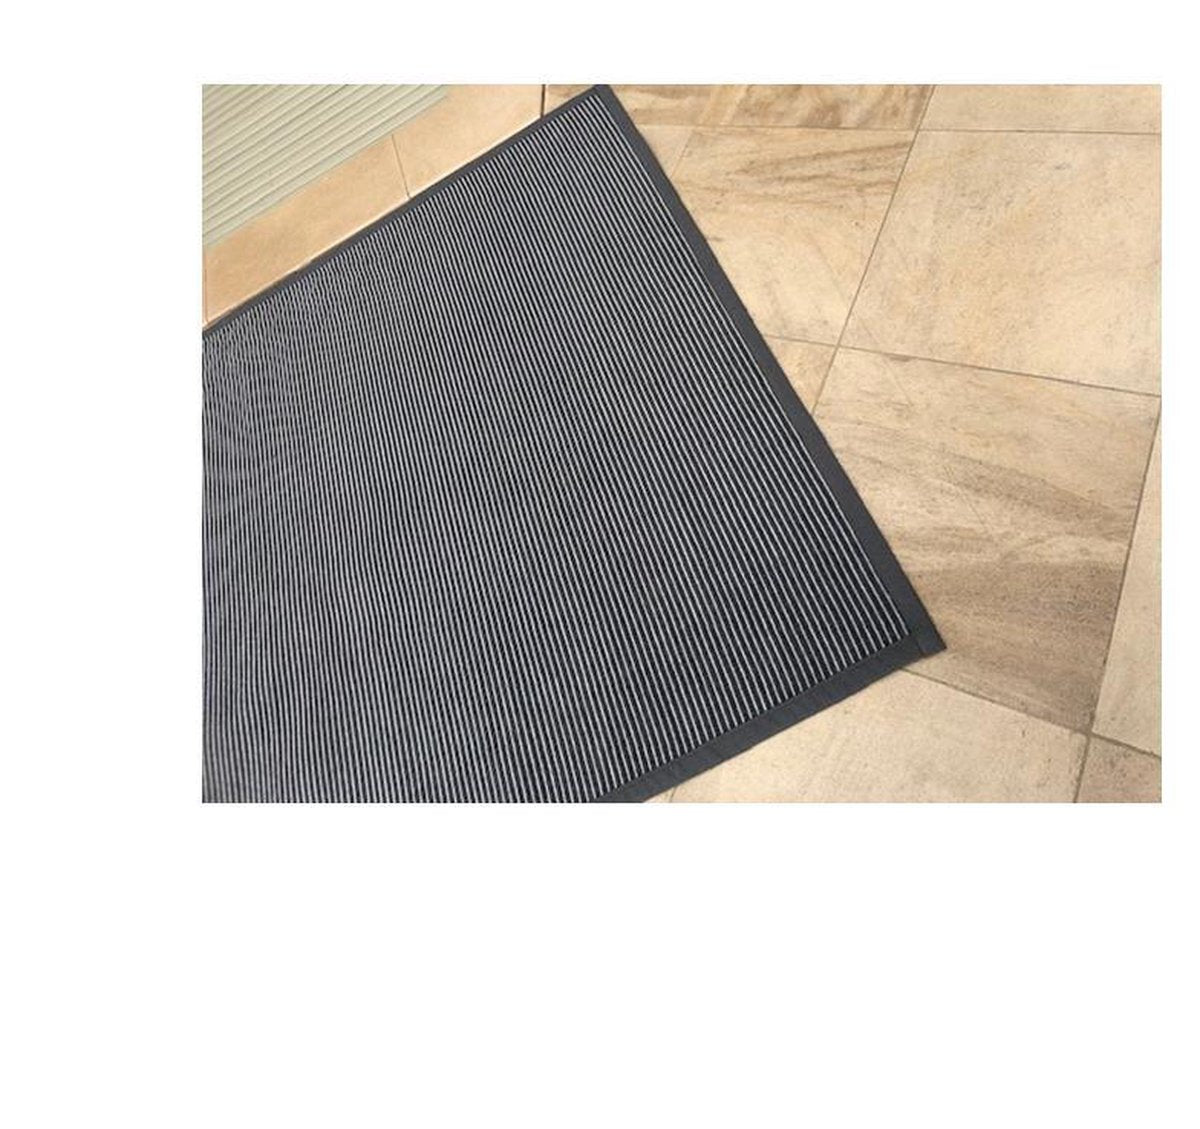 Exclusive Rug Viva recto verso - two-sided rug - free anti-slip included - light gray silver - 160/230 cm - carpet - striped and herringbone